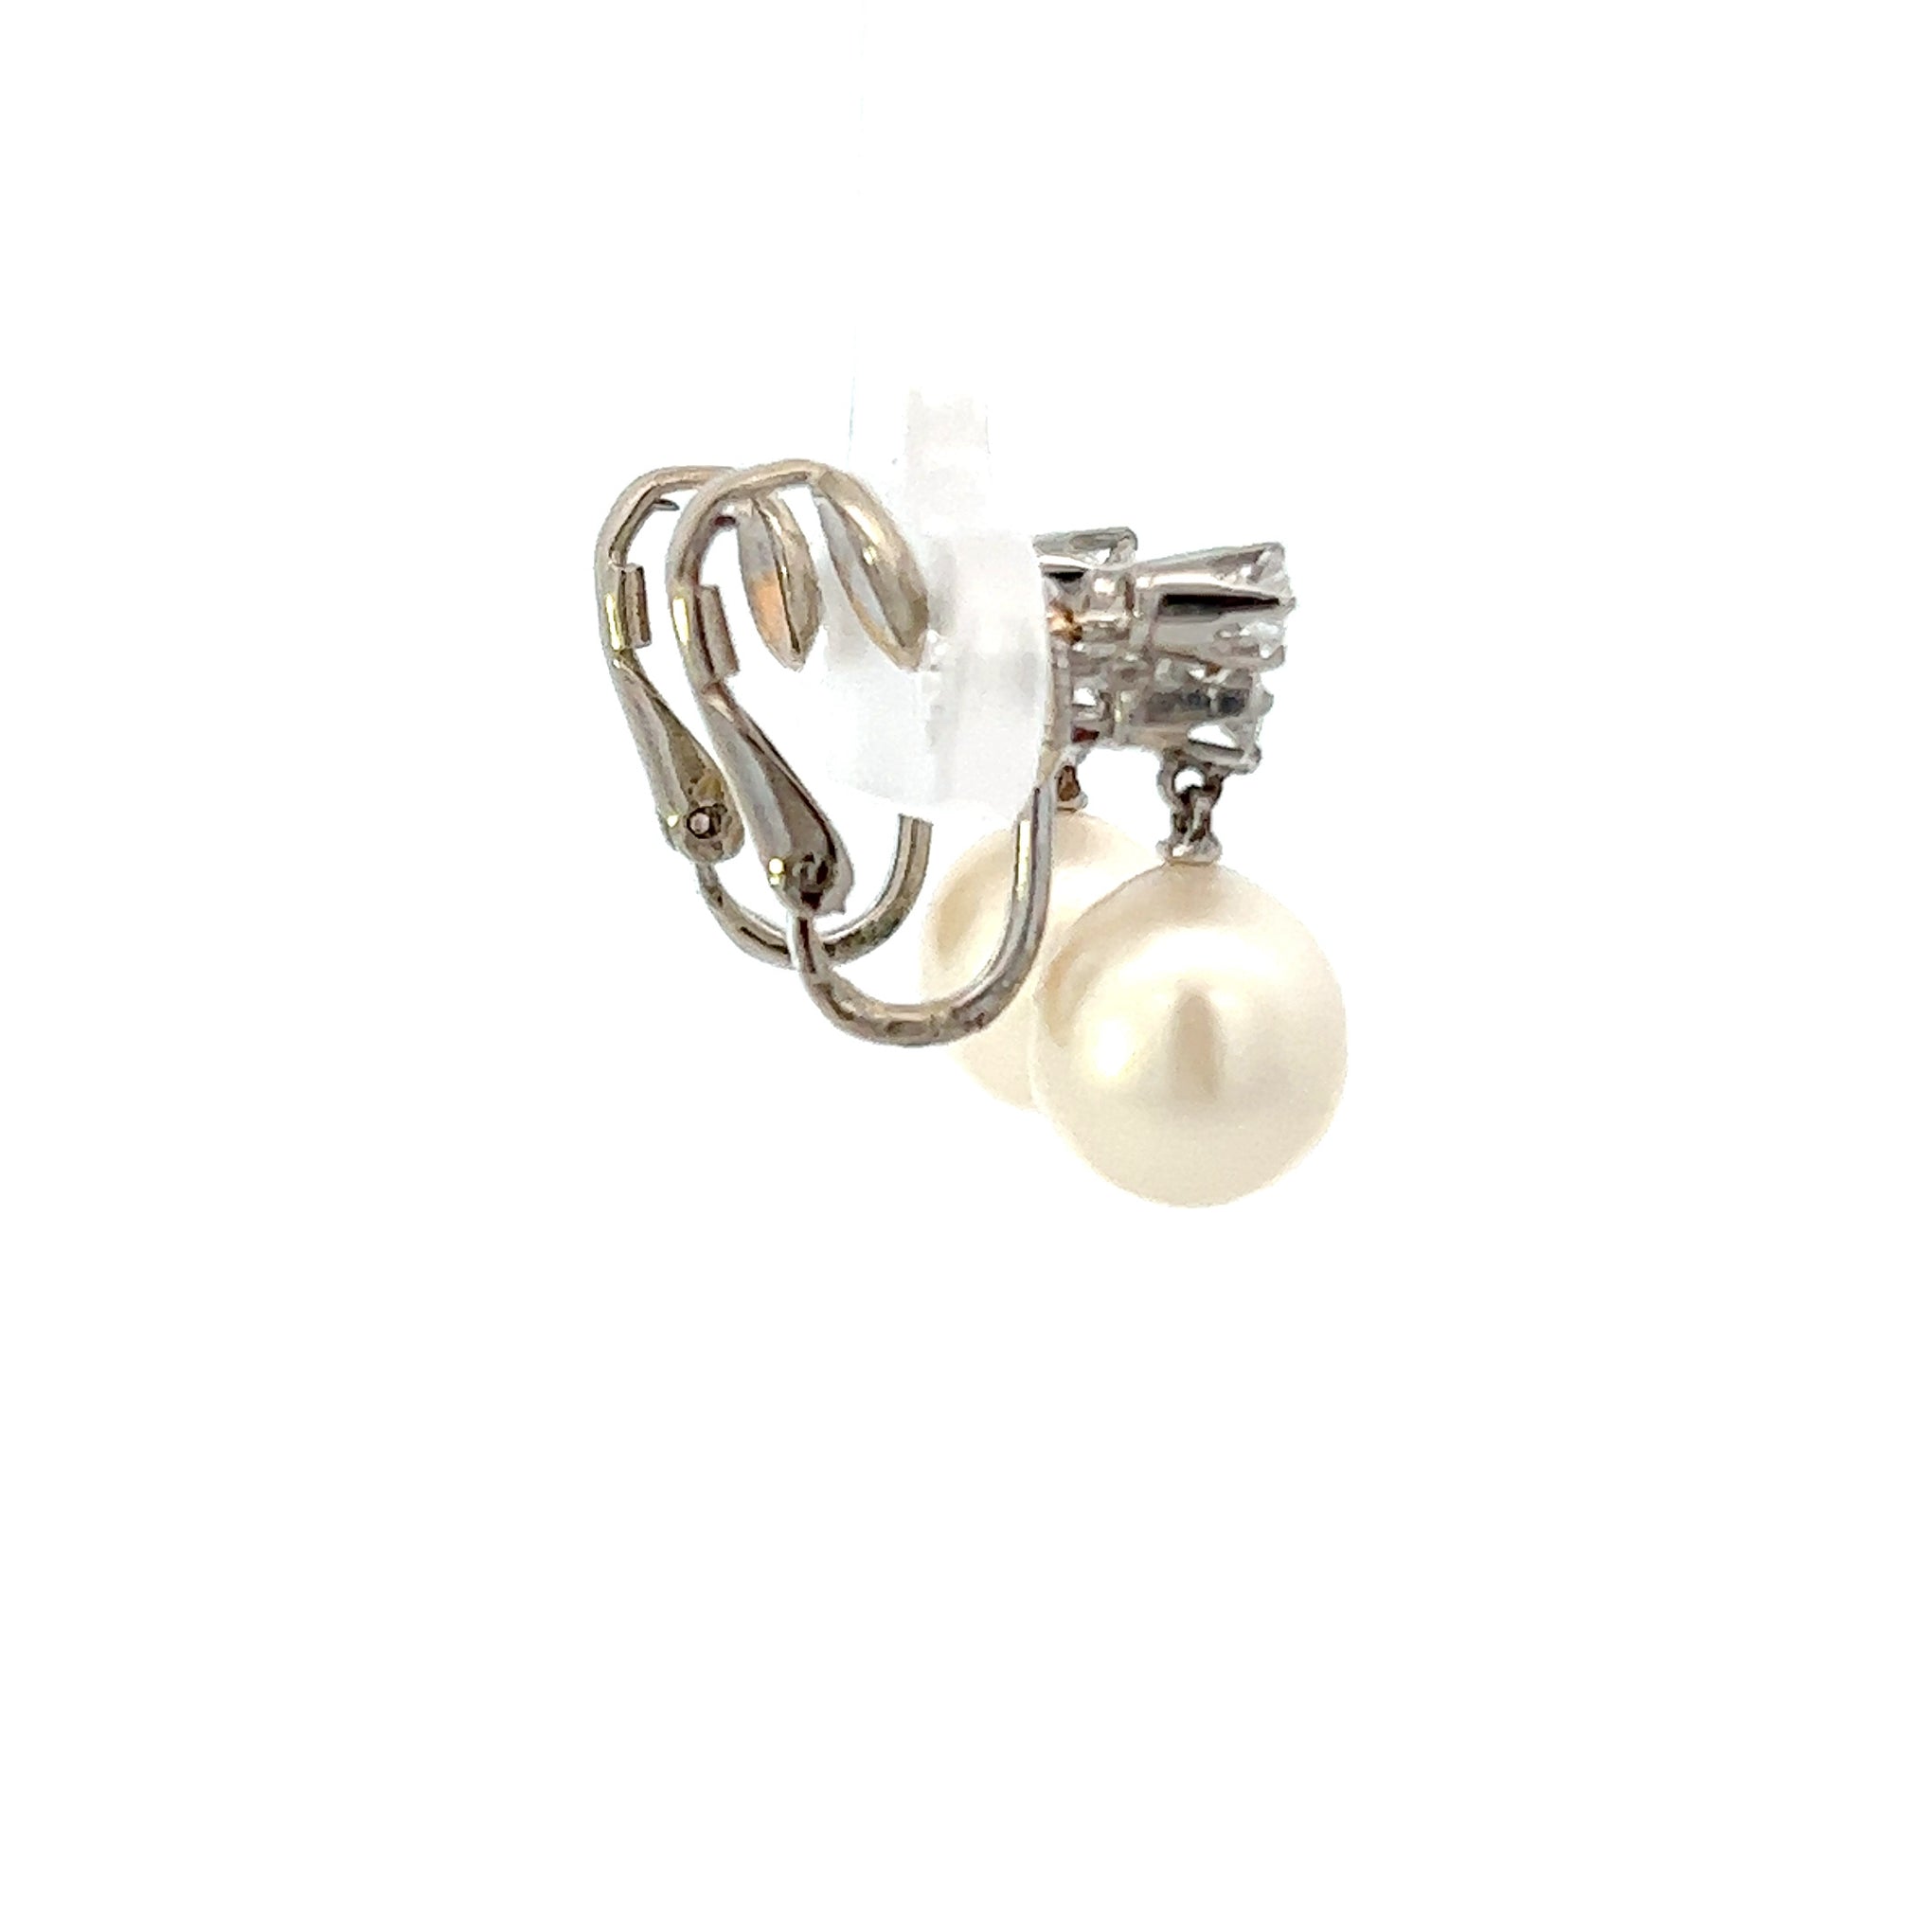 Vintage 14KT White Gold Pearl And Diamond Earrings